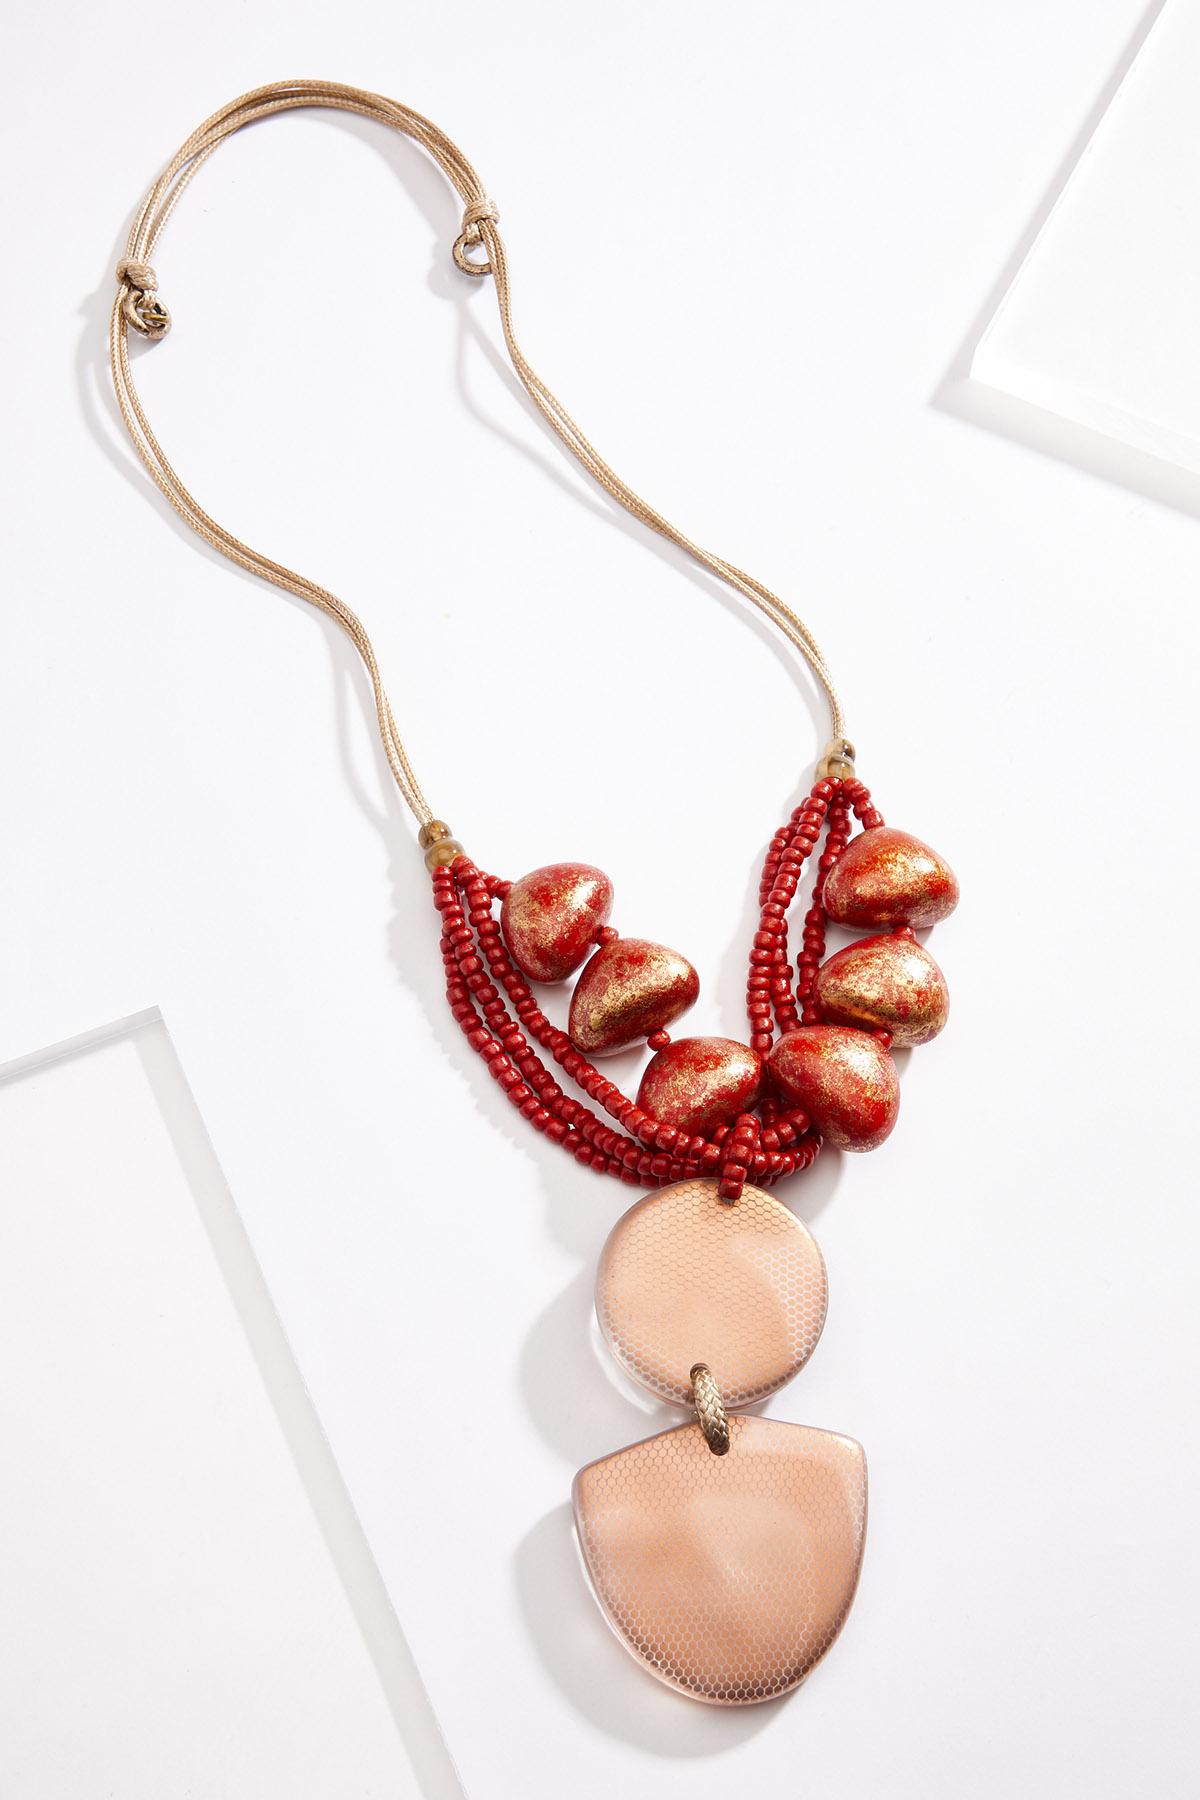 Chunky Habanero Pull-String Necklace